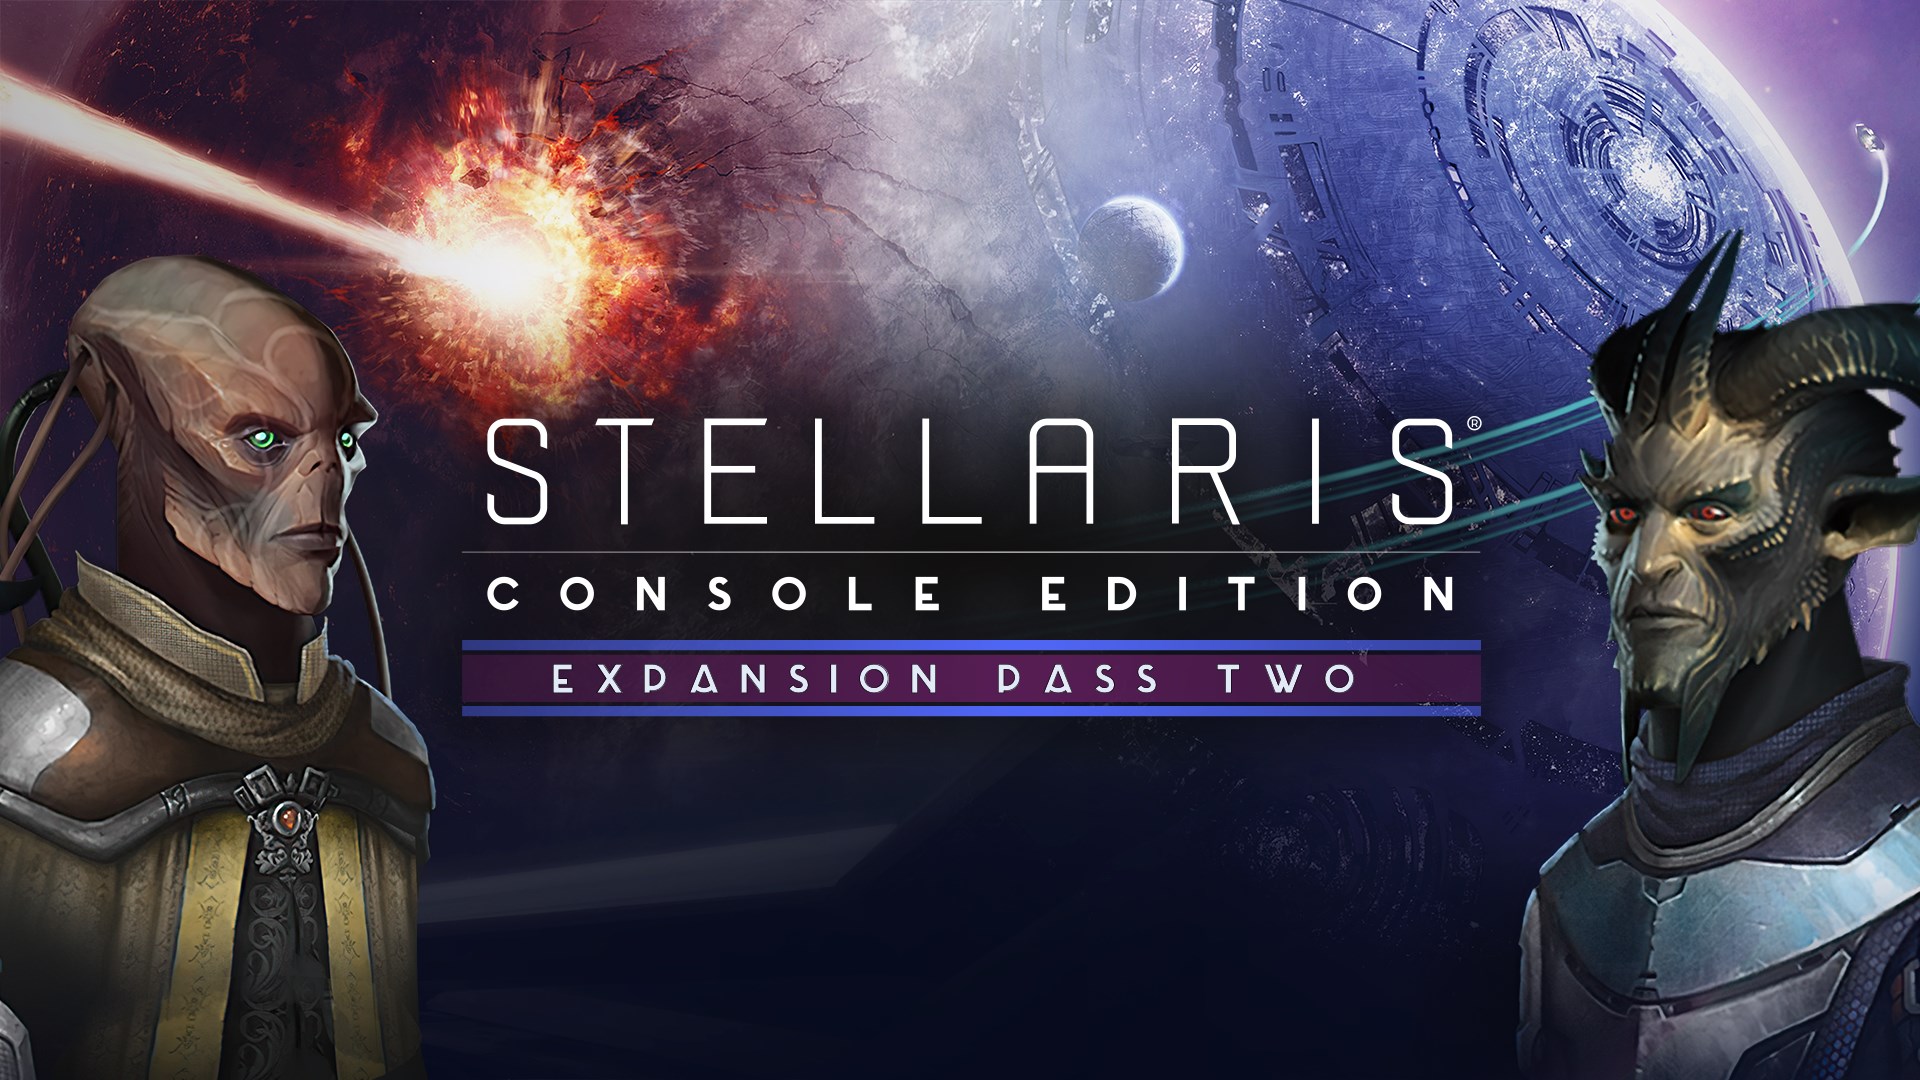 Stellaris Console Edition – Expansion Pass Two